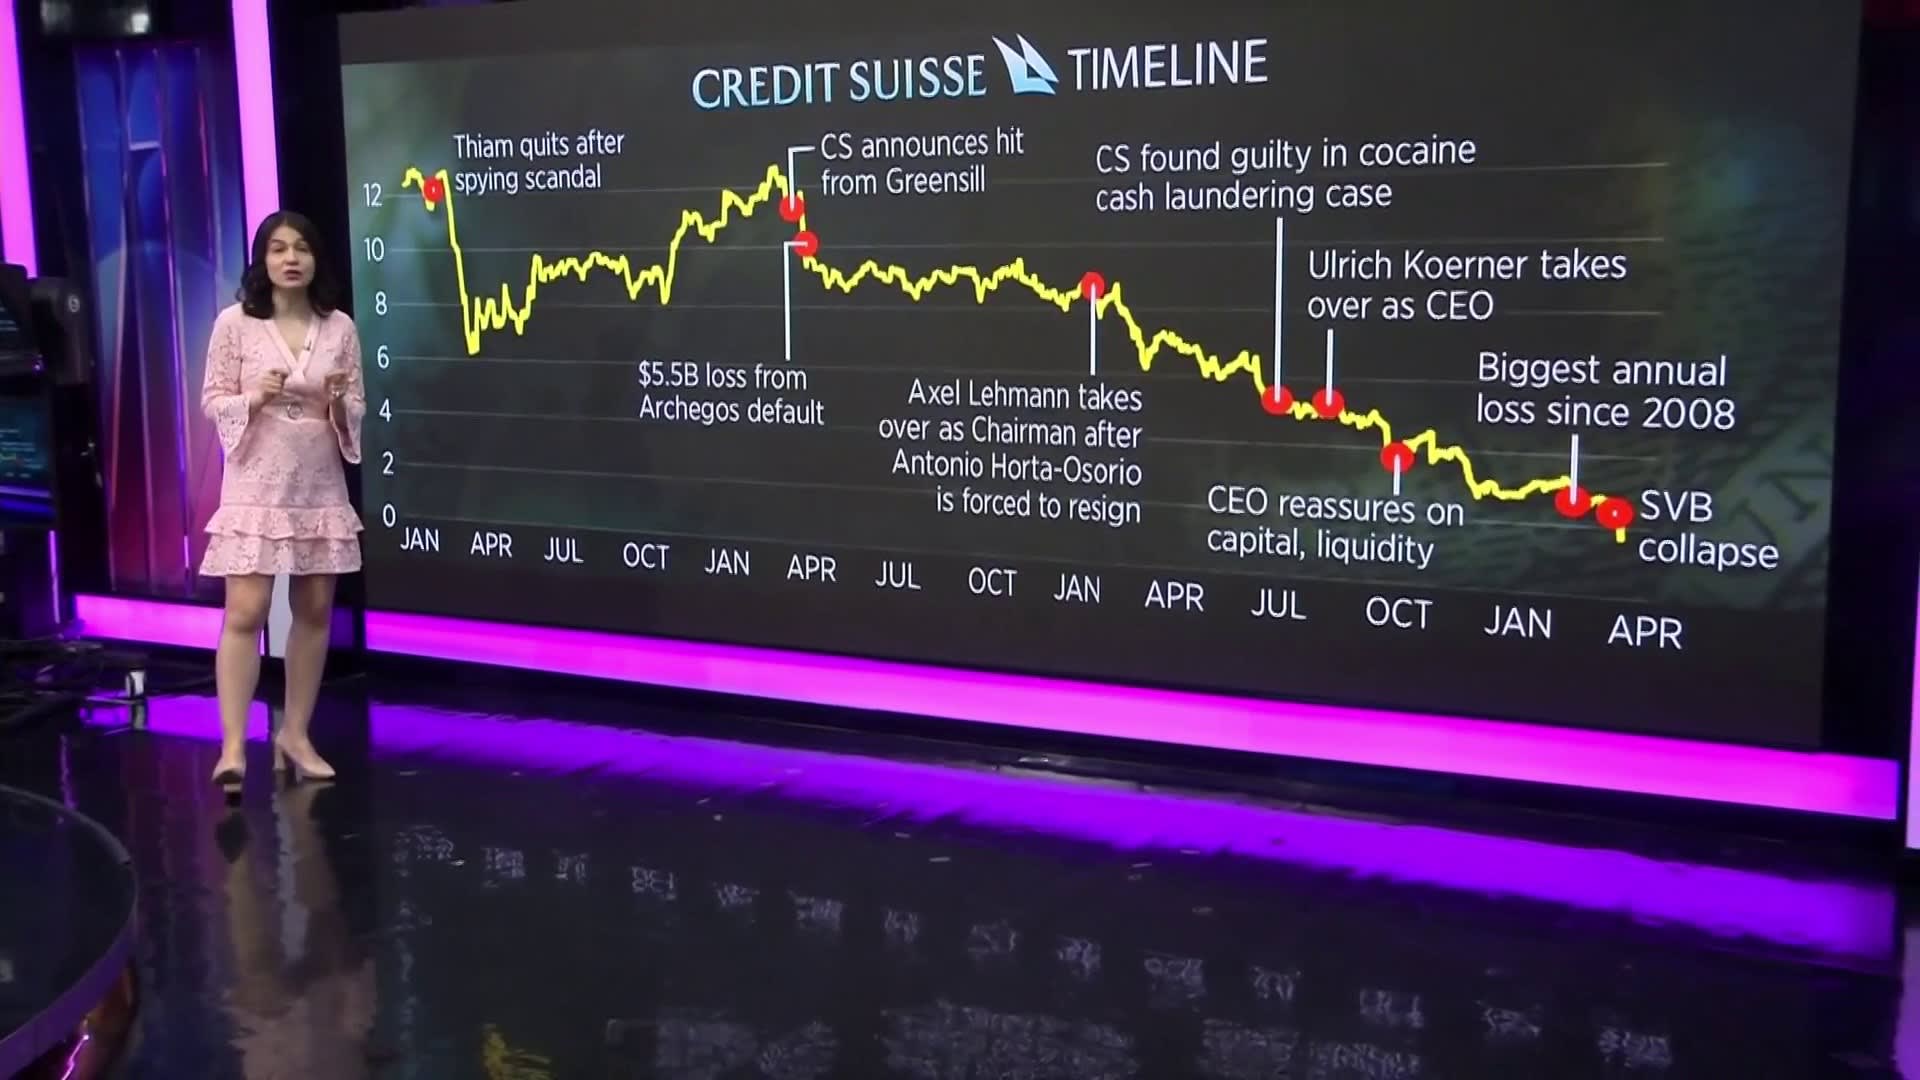 Credit Suisse plans to borrow about $54 billion from central bank